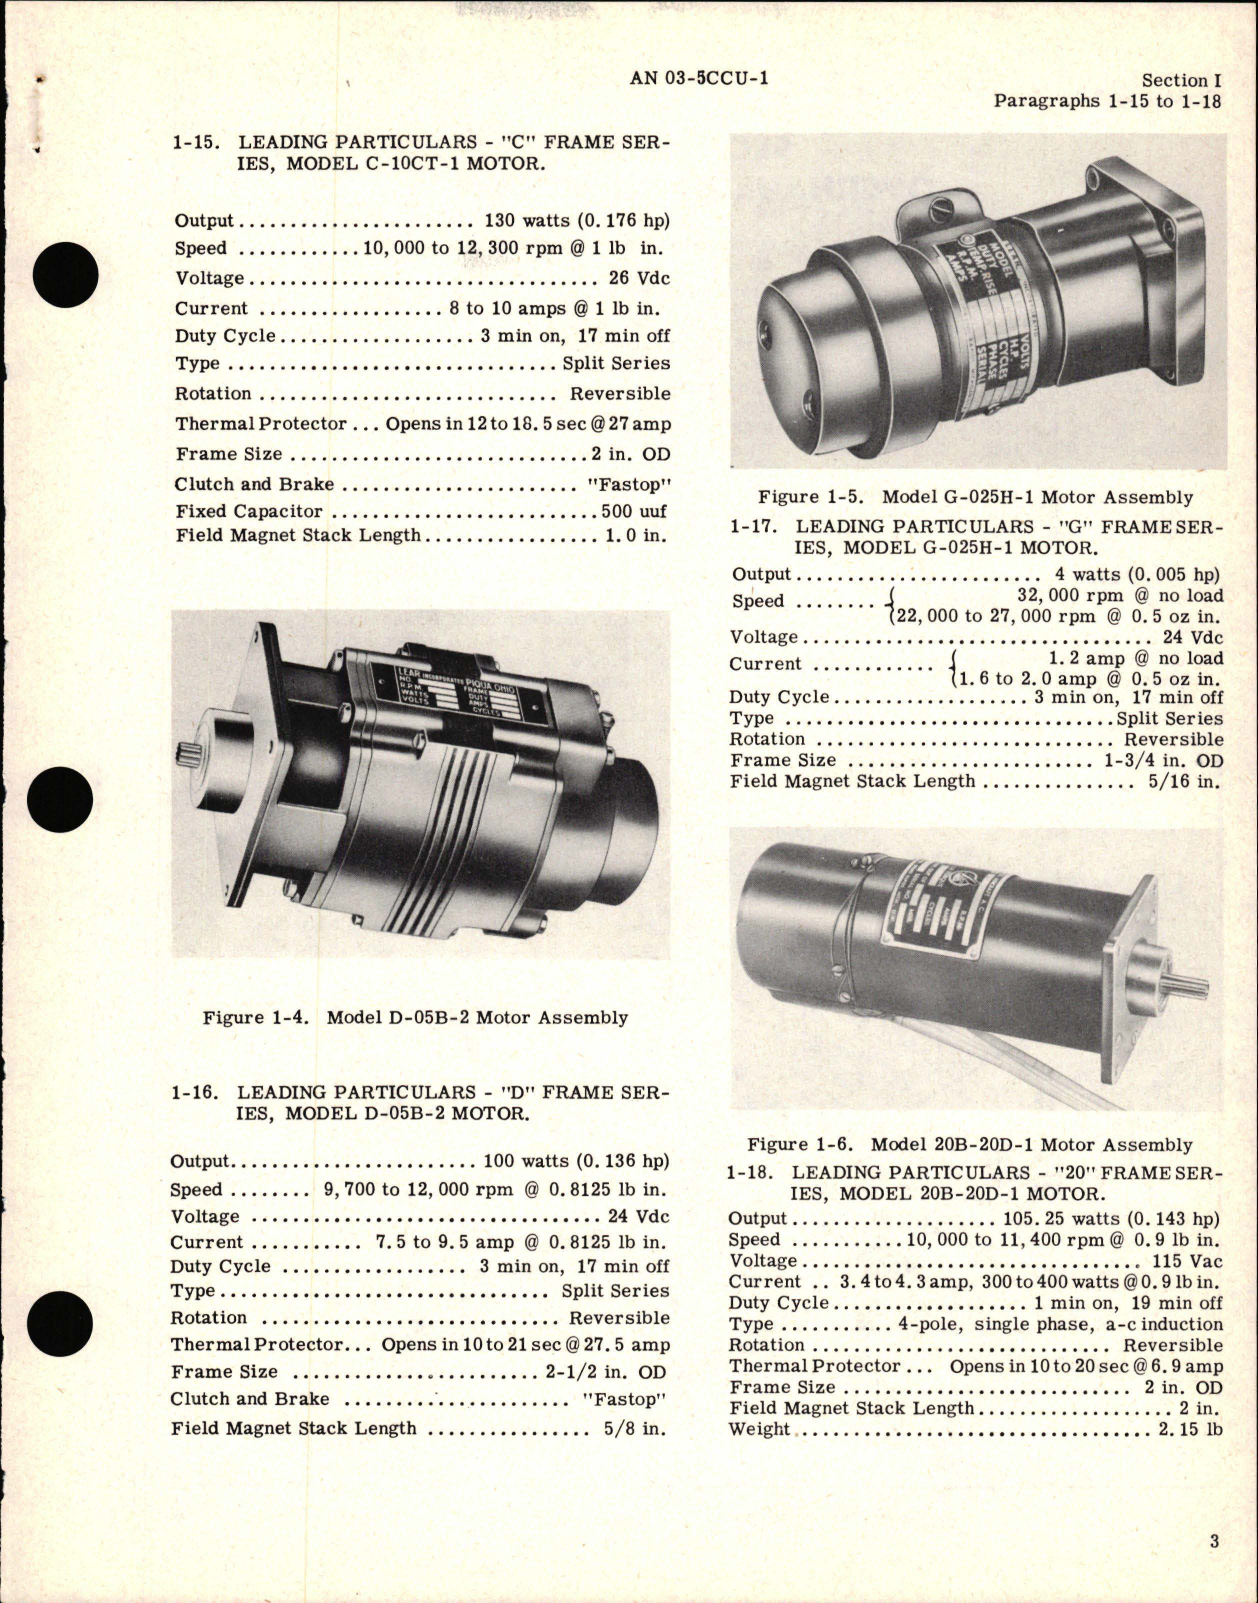 Sample page 5 from AirCorps Library document: Overhaul Instructions for Fractional Horsepower Motors 